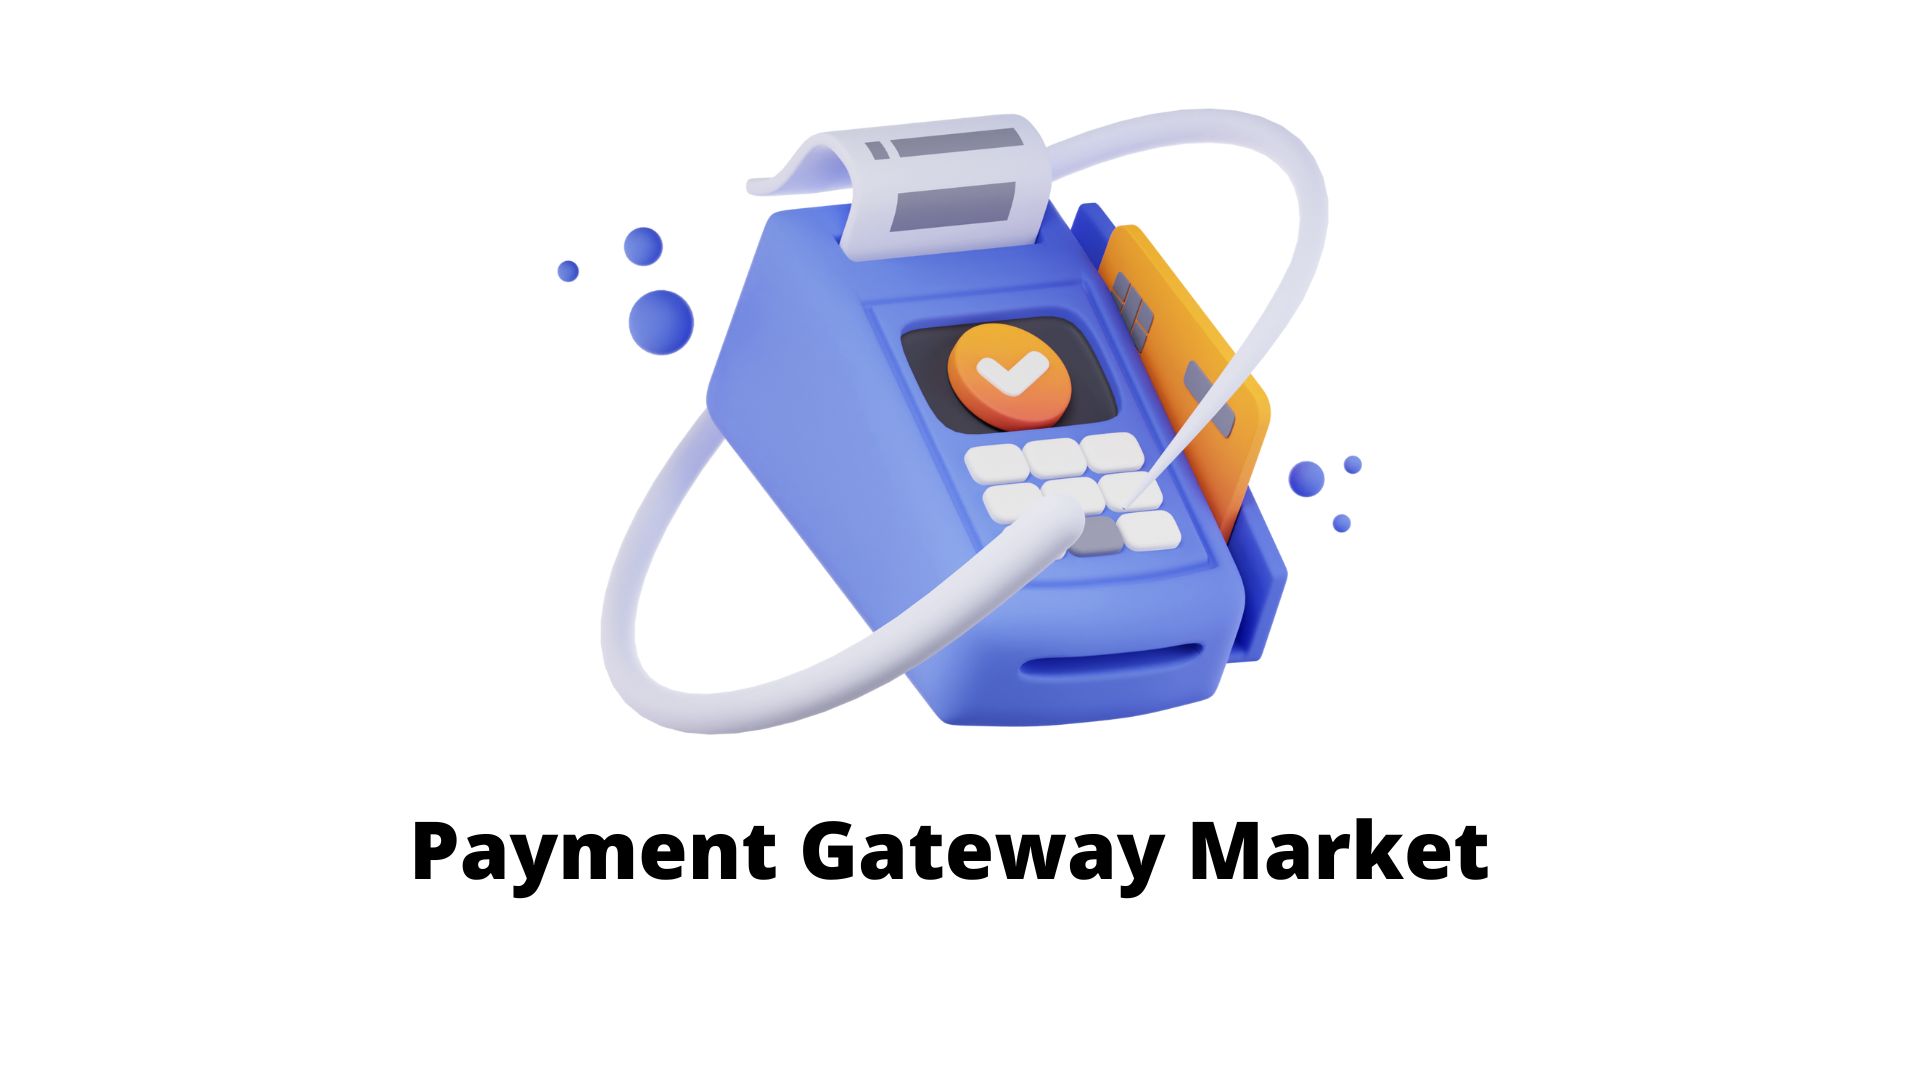 Payment Gateway Market Is Estimated to be Worth US$ 161 Billion by 2032-end at a CAGR of 20.5%